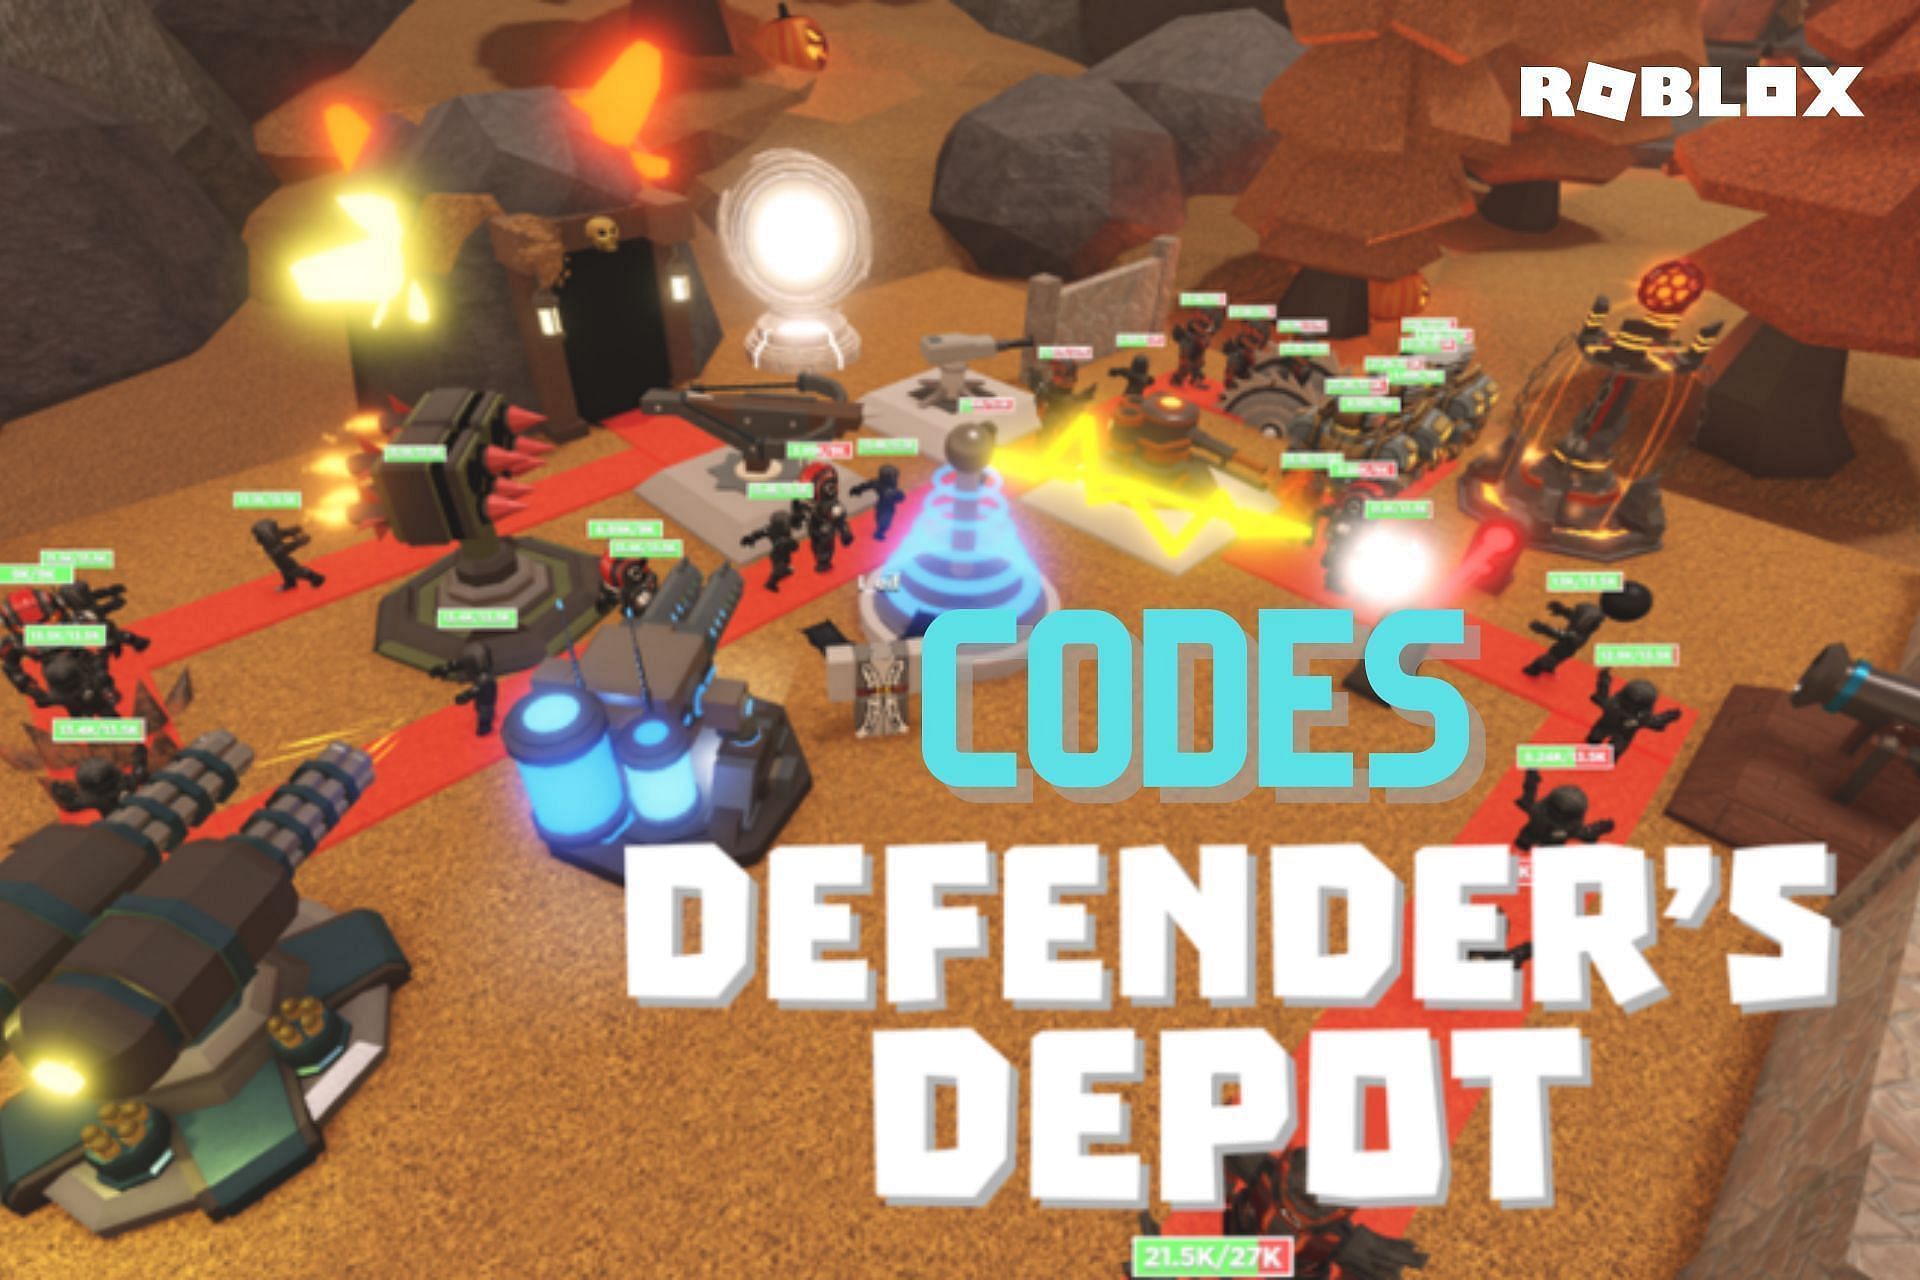 Defenders Depot Codes - Free Crates and More